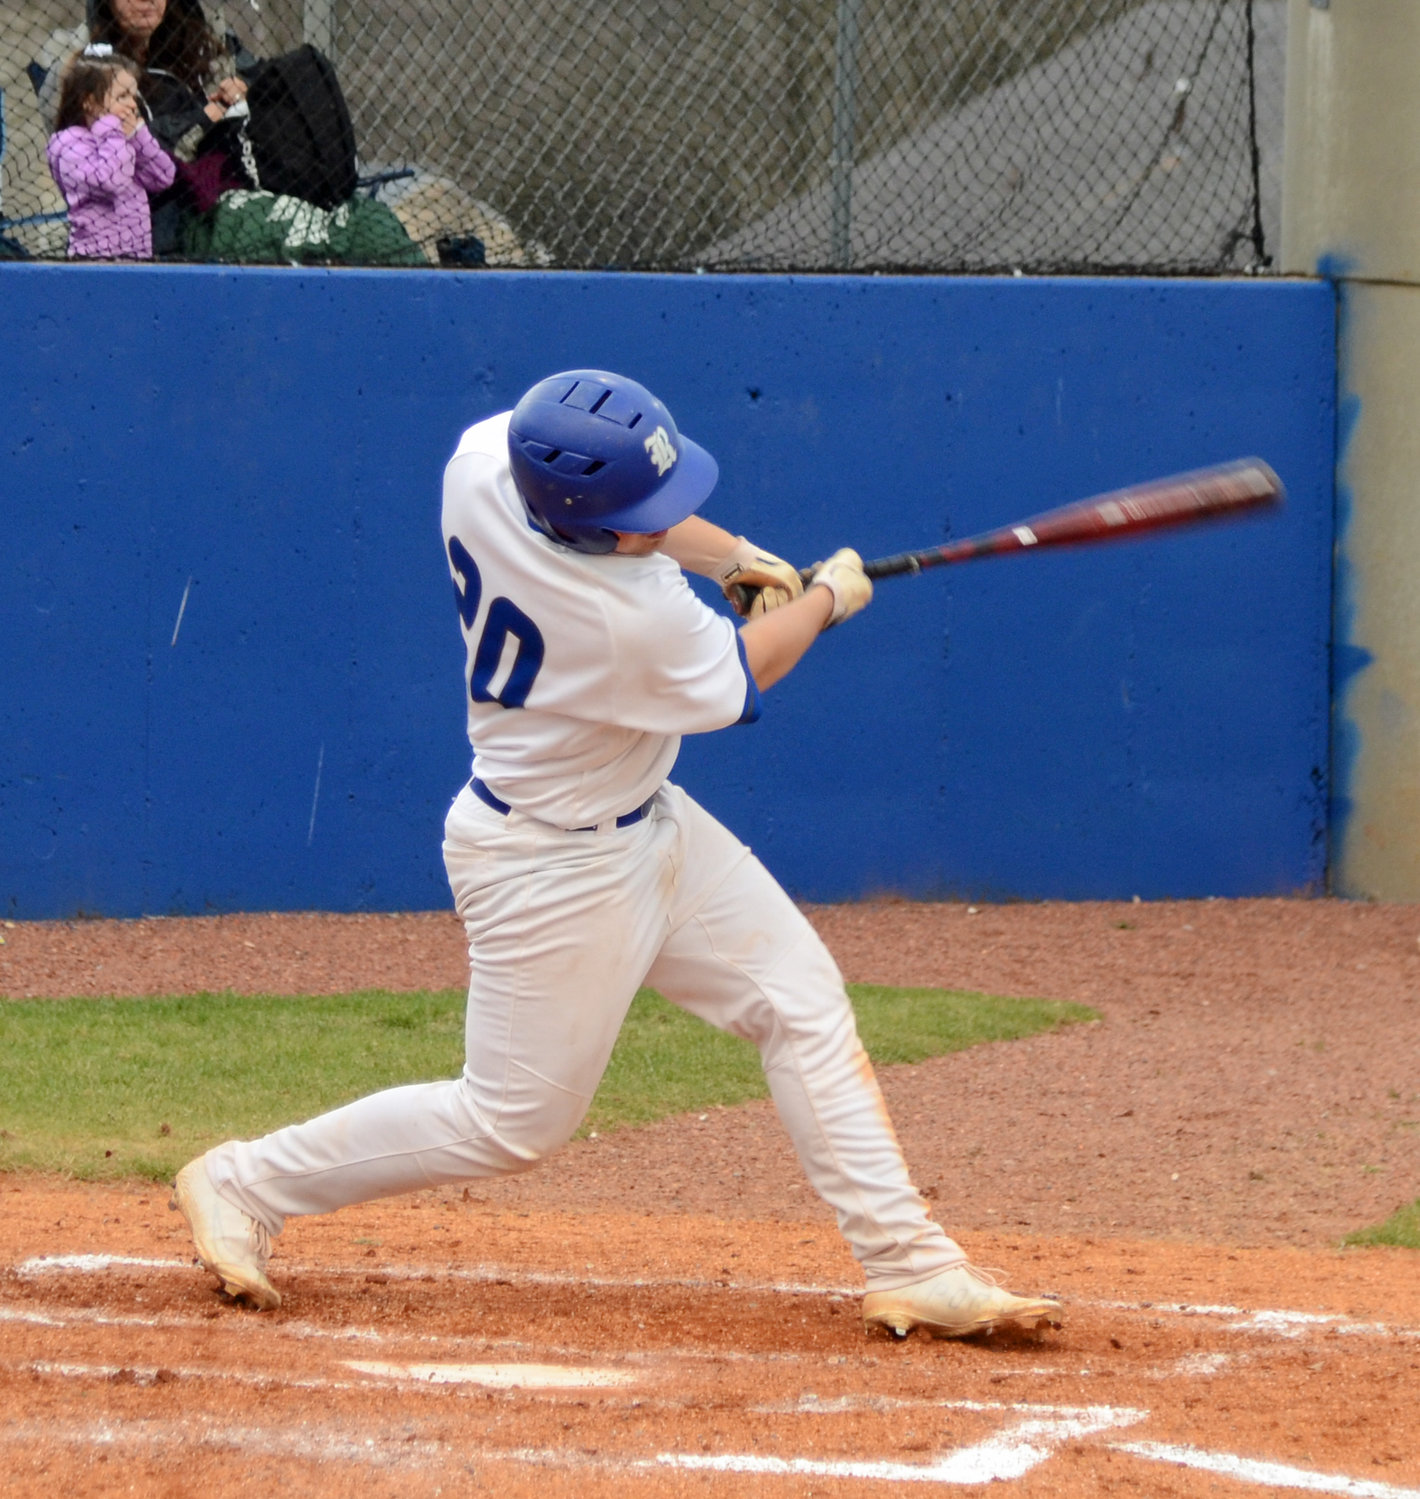 Riley Durbin went 4-for-4 versus the Tigers, including this run-scoring double in the bottom of the second inning.